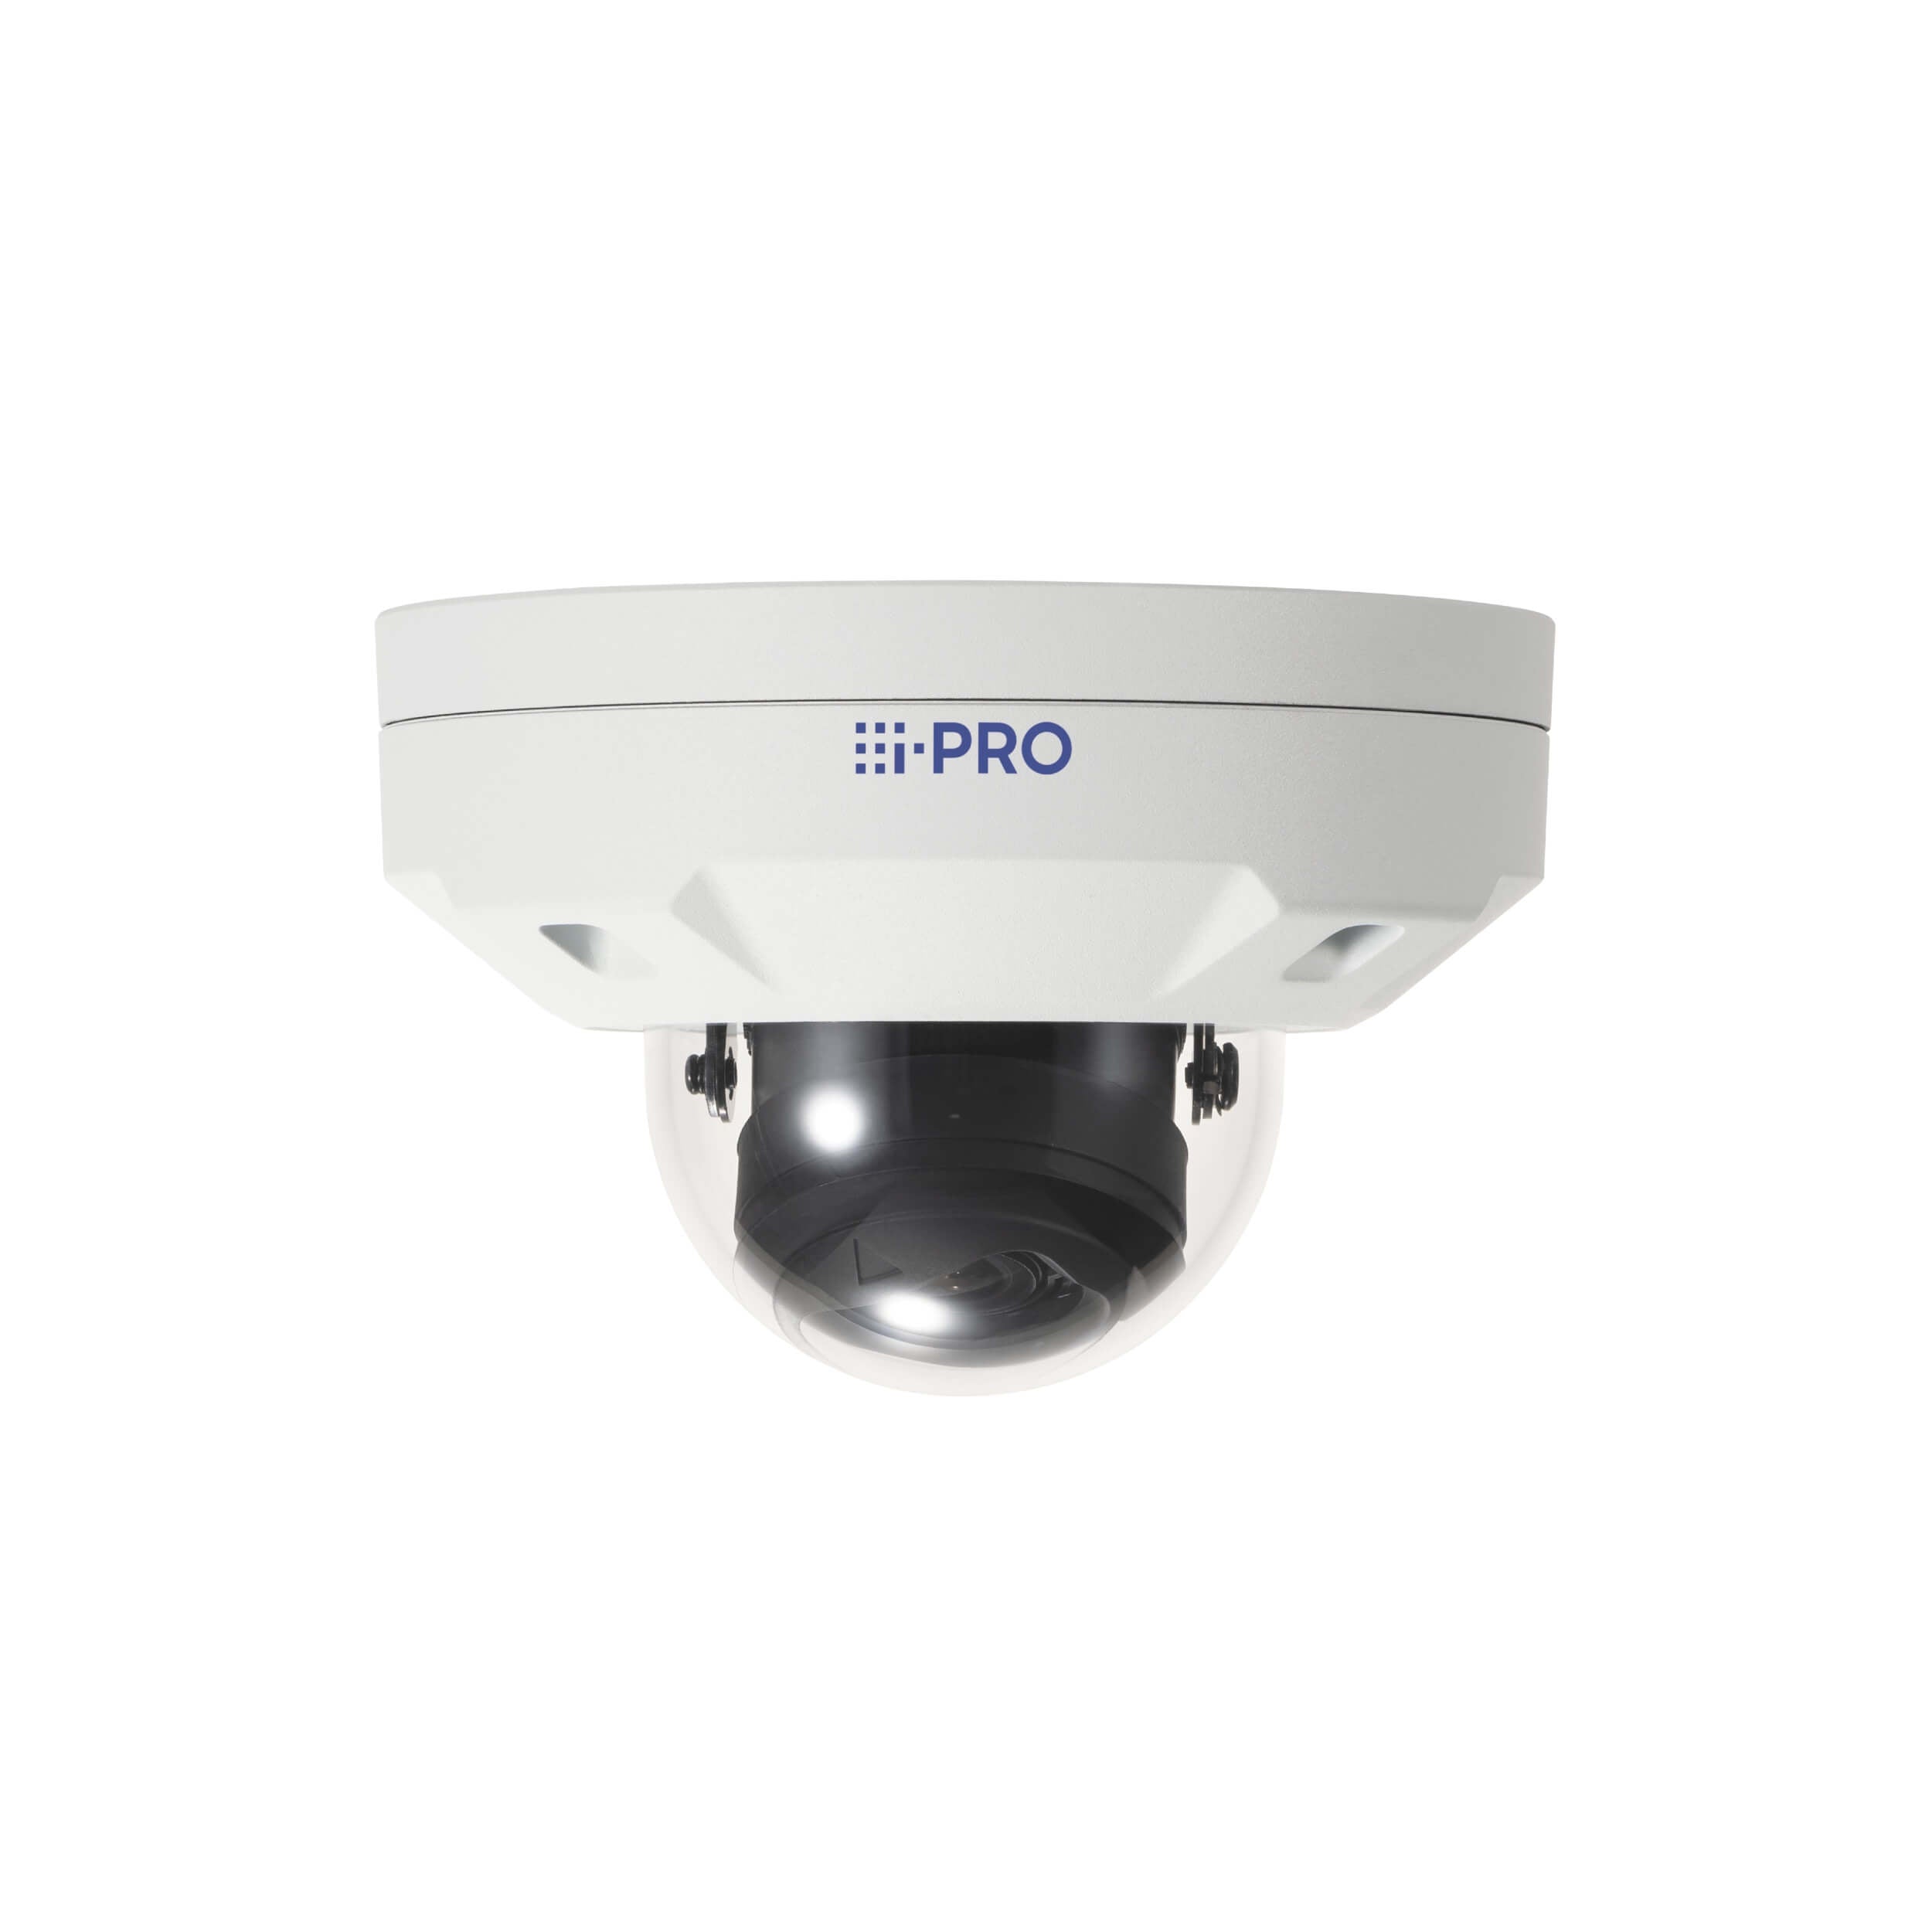 Panasonic WV-S25500-V3LG 5MP Vandal Resistant Outdoor Dome Network Camera, Smoke Dome with AI Engine with 2.9-9mm Lens